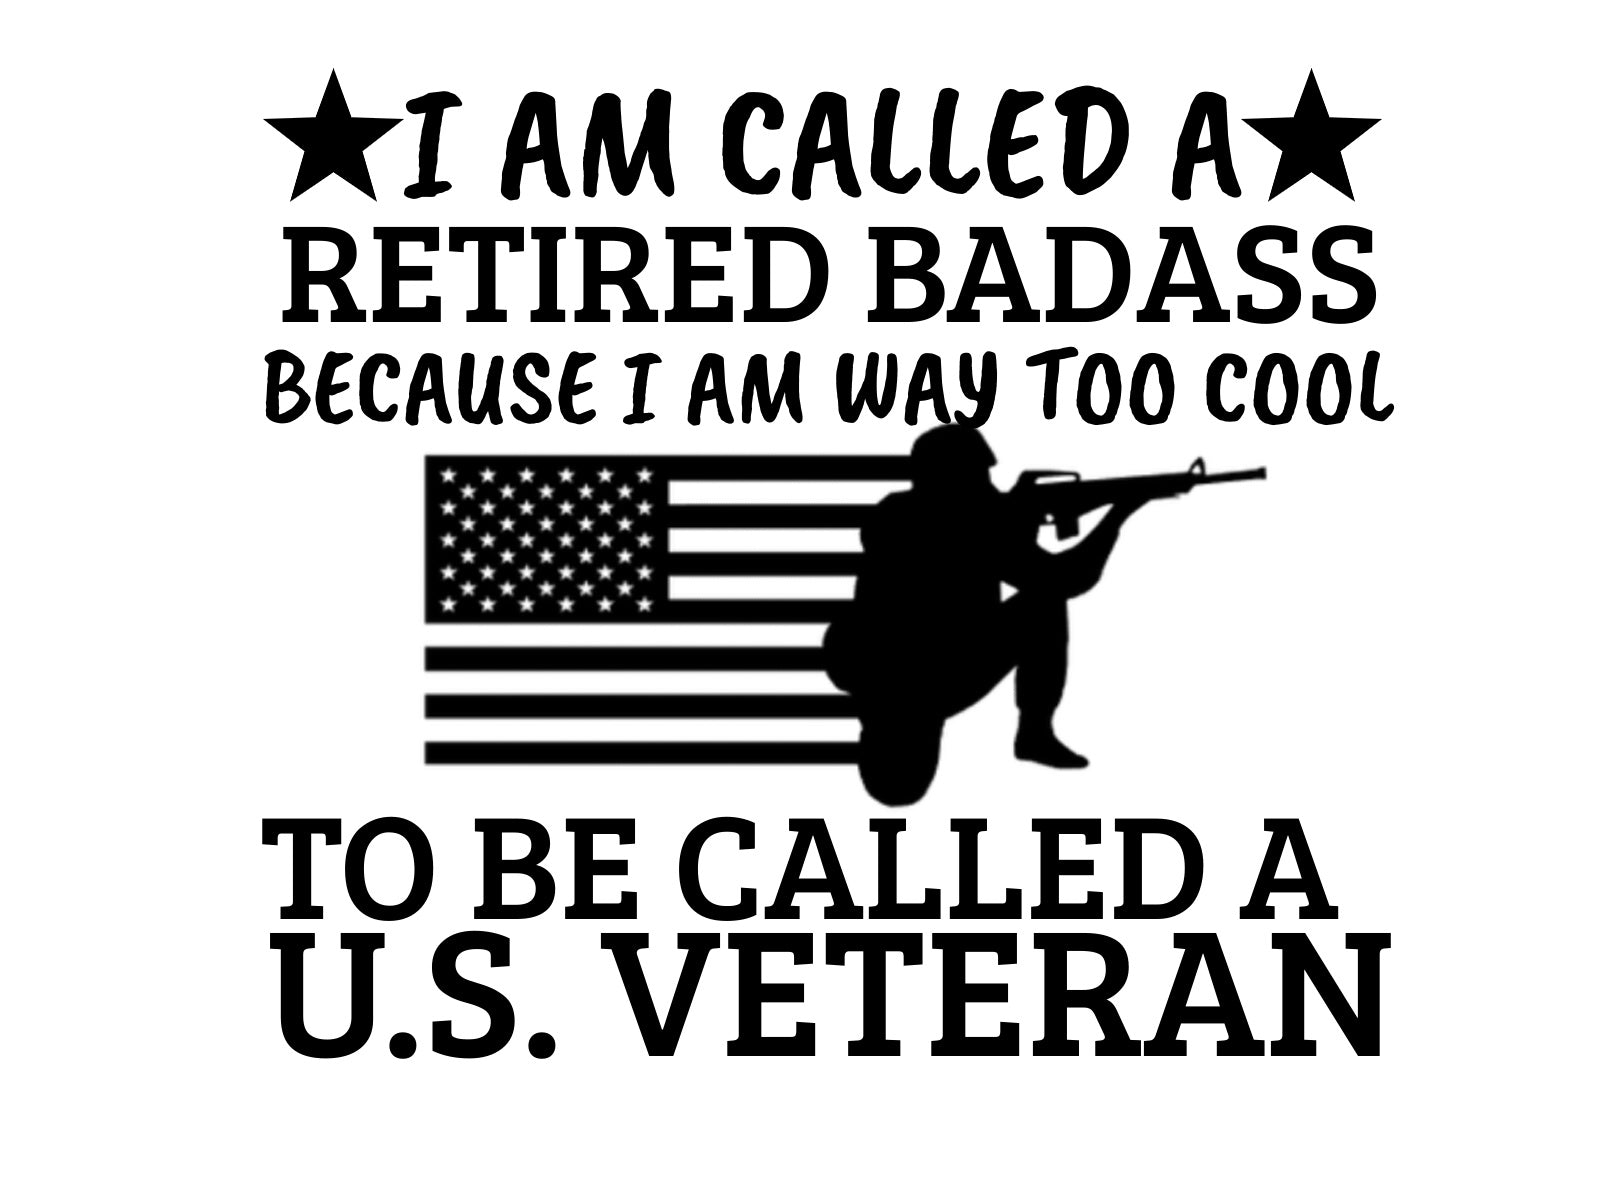 I Am Called A Retired Badass Because I'm Way Too Cool To Be Called A U.S. Veteran